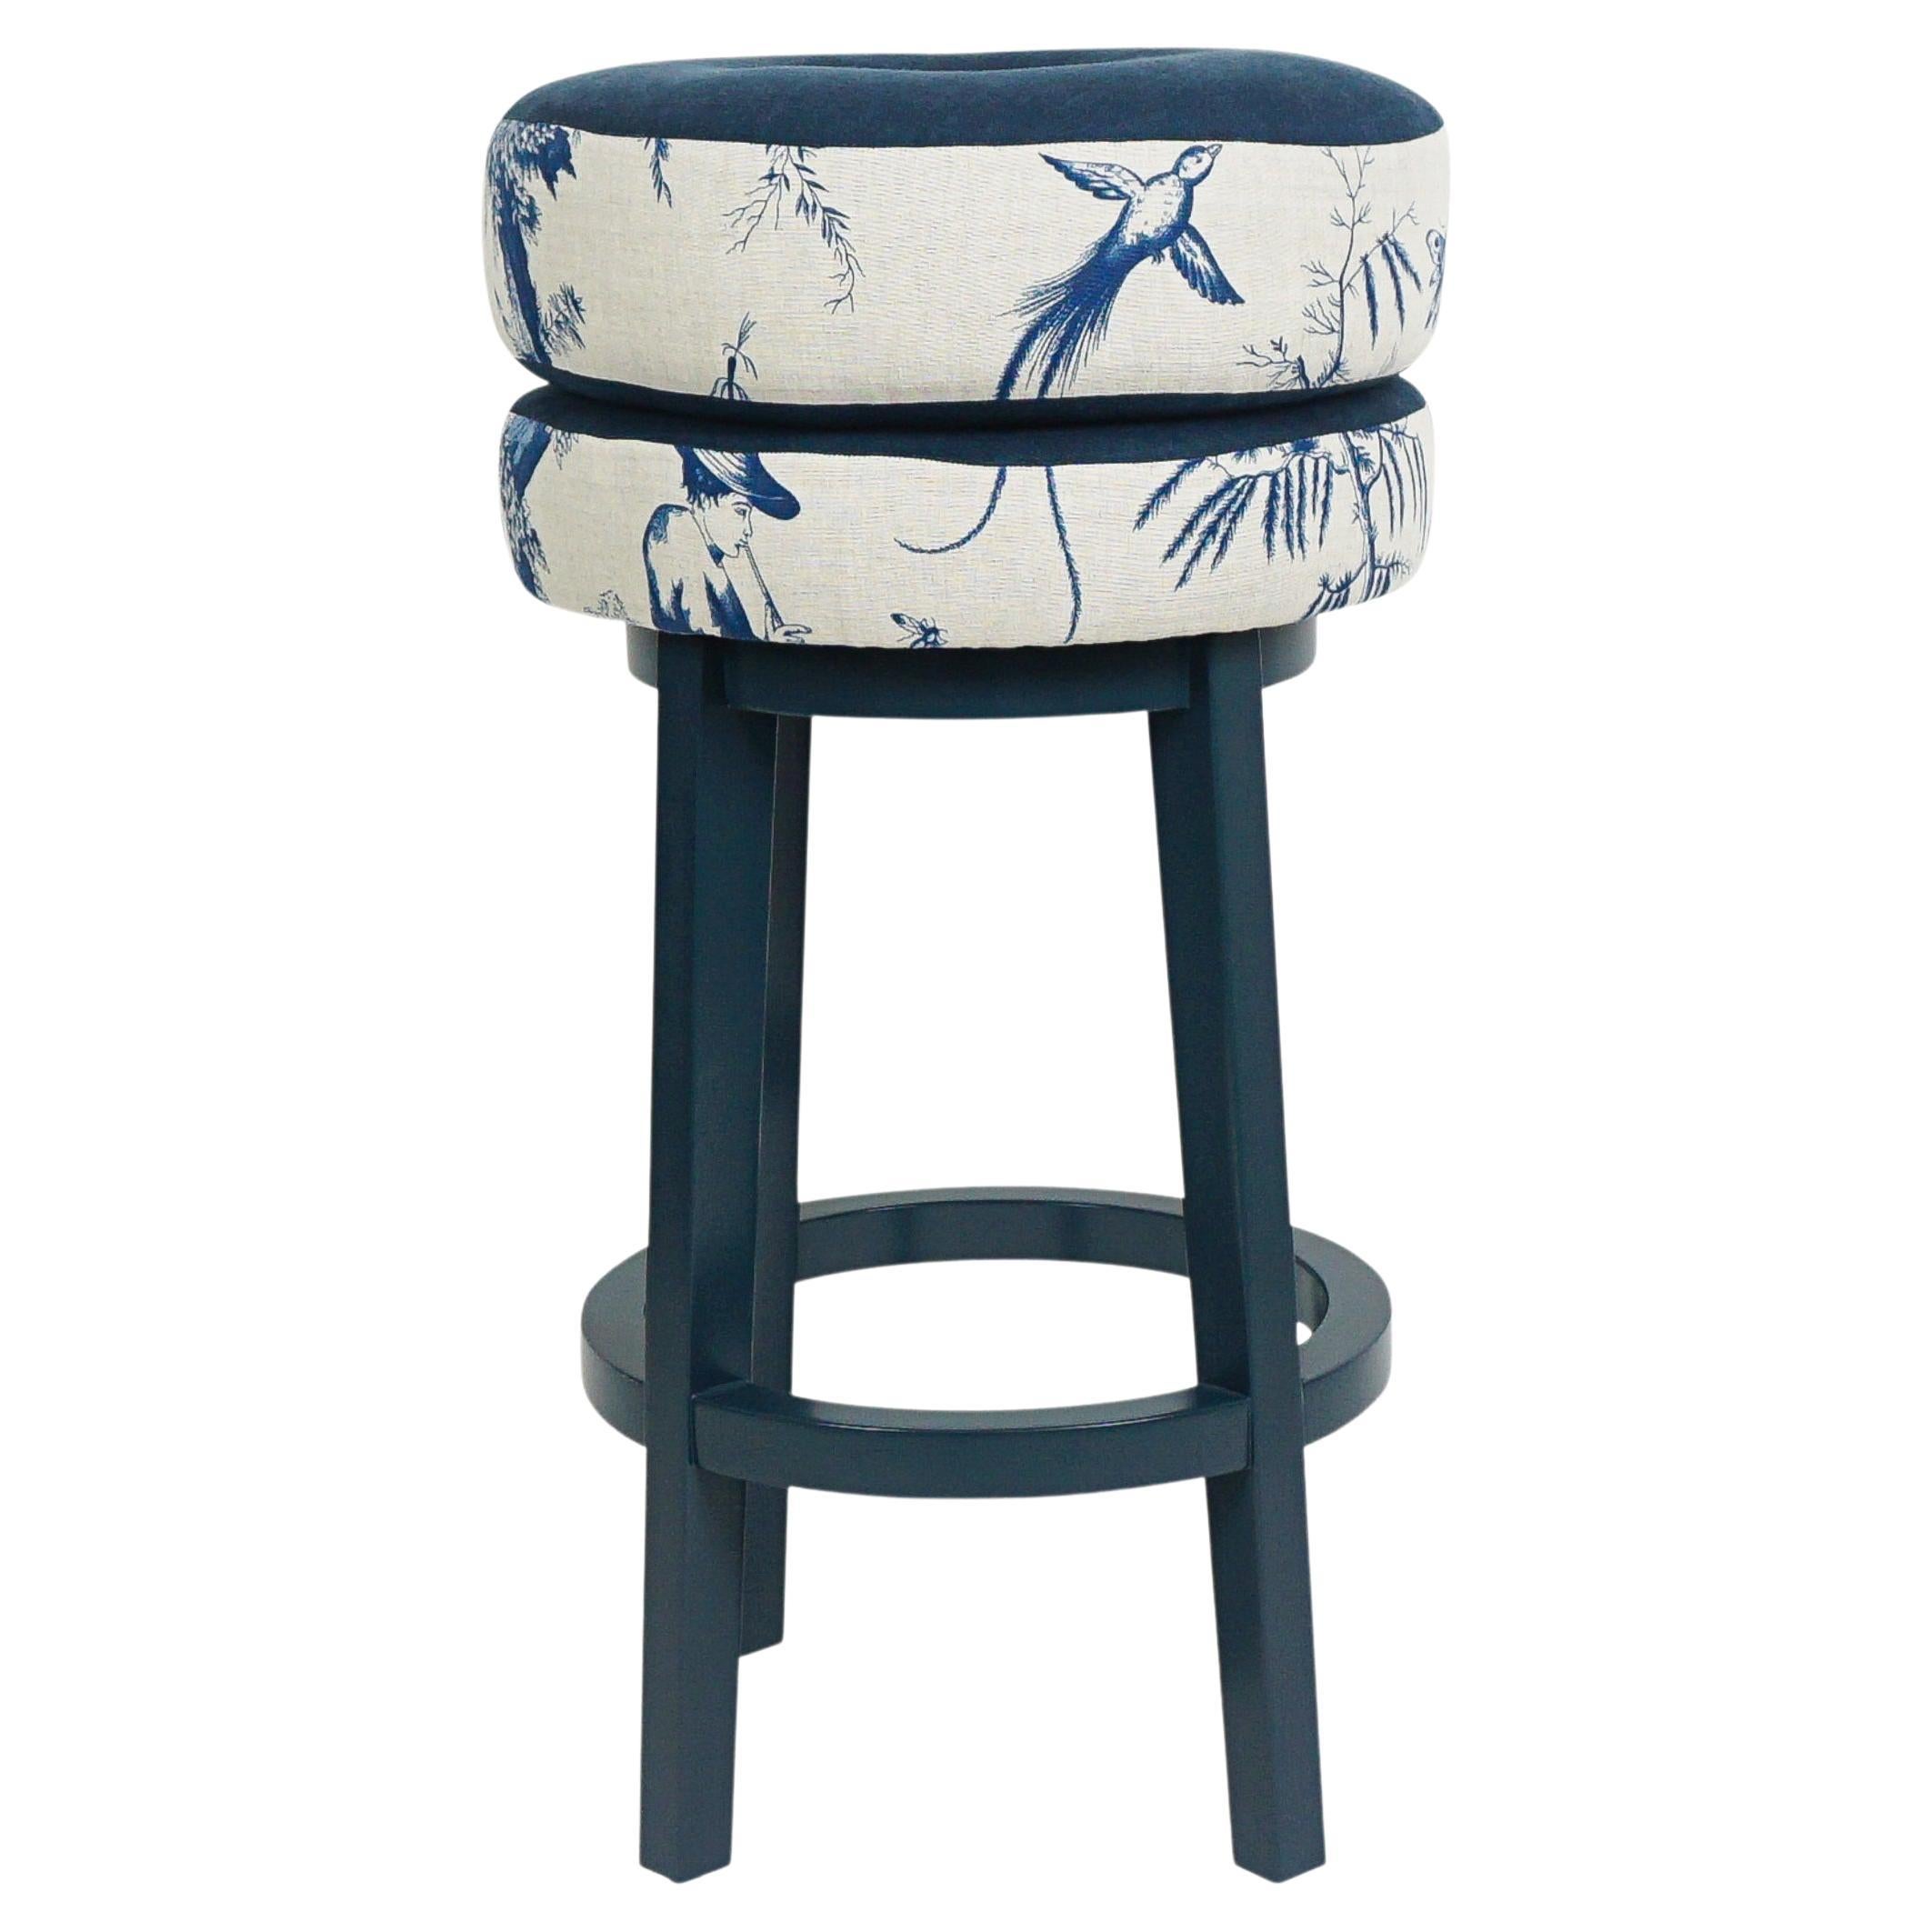 Modern Donut Shaped Bar Stool with Japanese Inspired Shengyou Toile